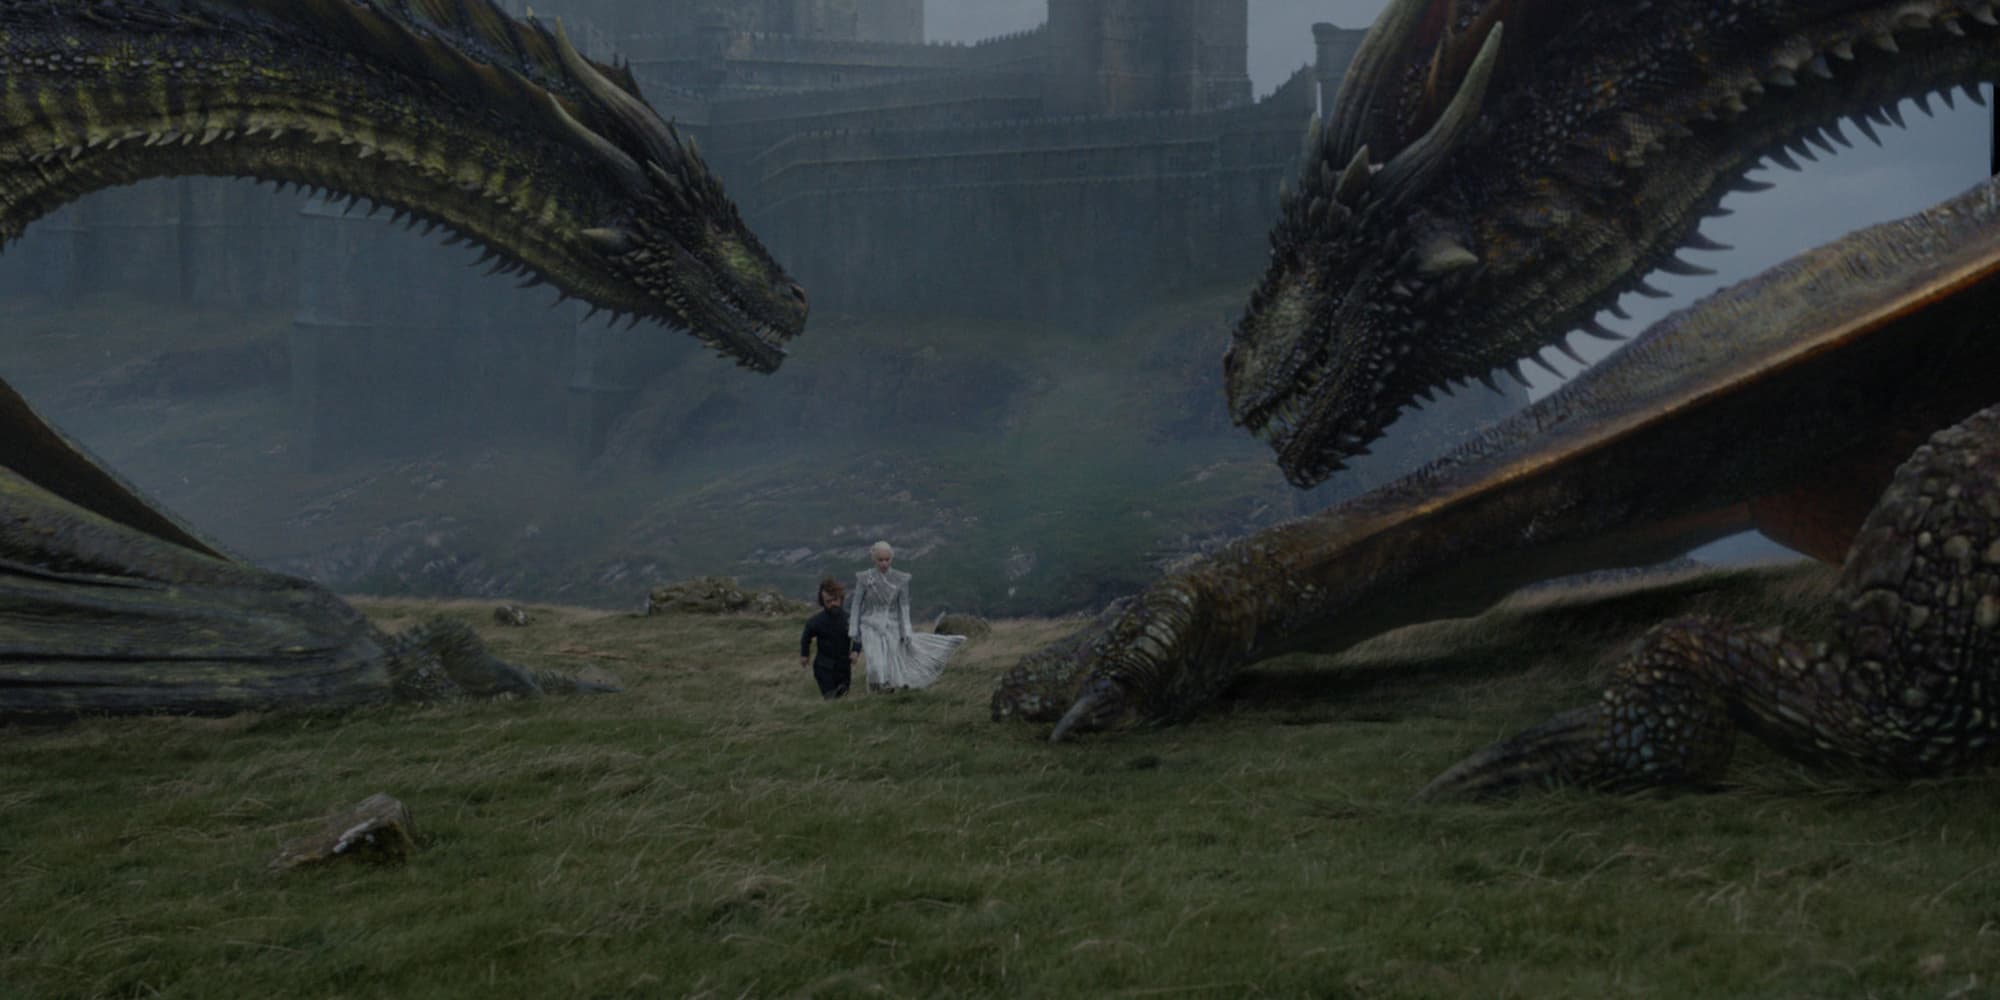 Dragons in Game of Thrones